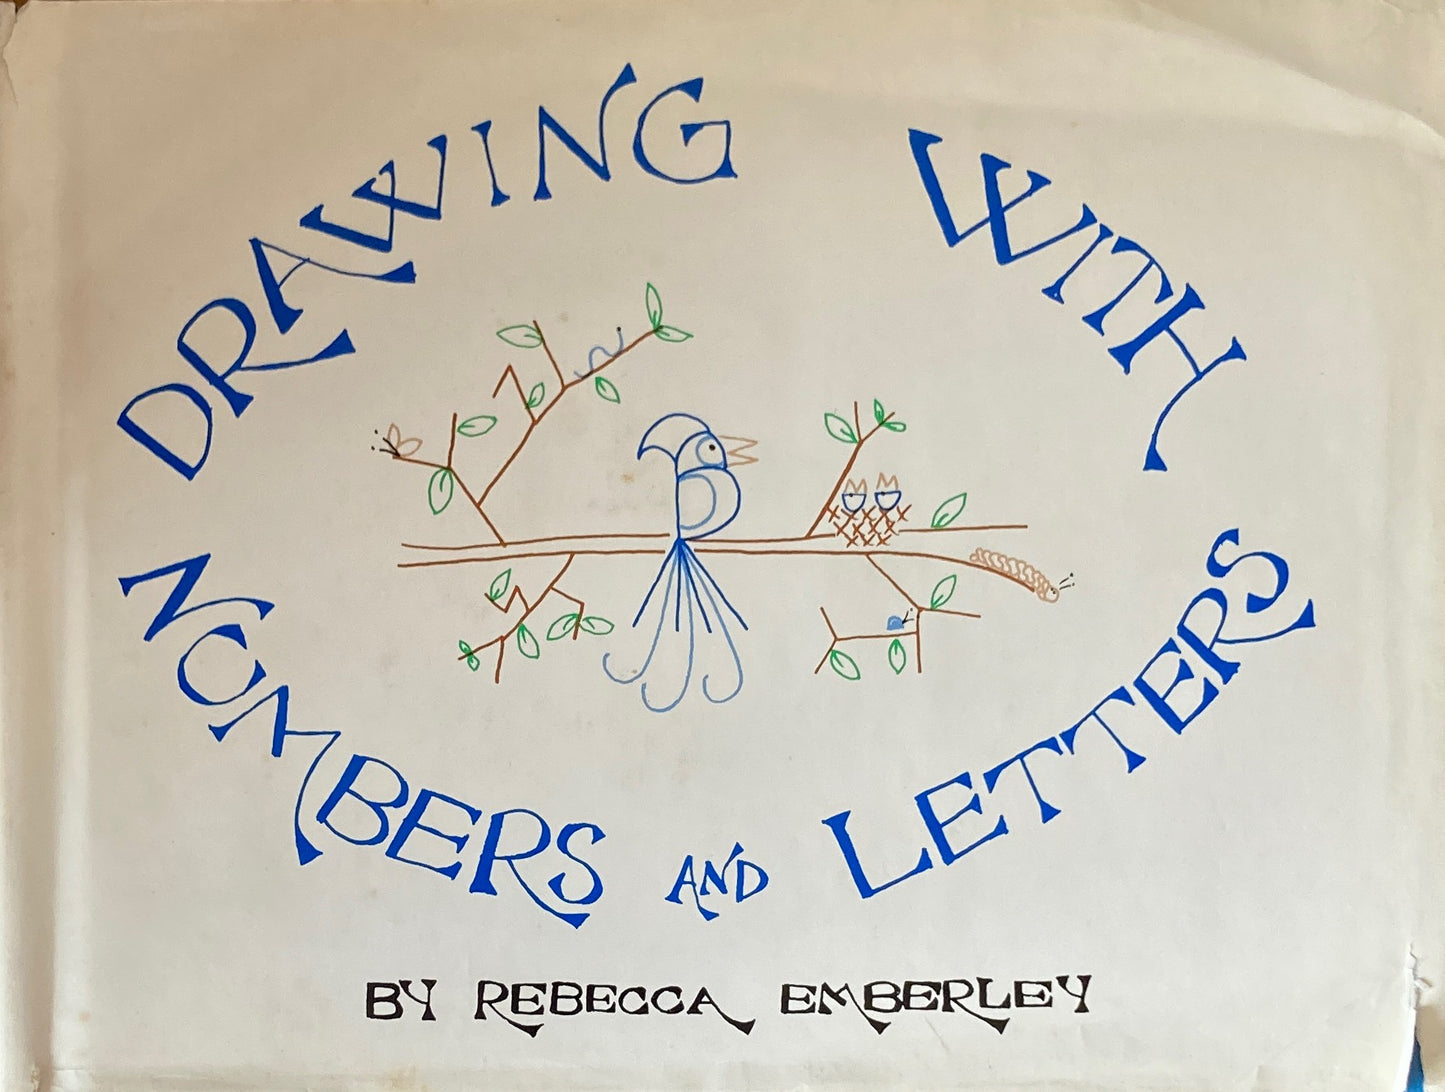 Drawing with Numbers and Letters　Rebecca Emberley